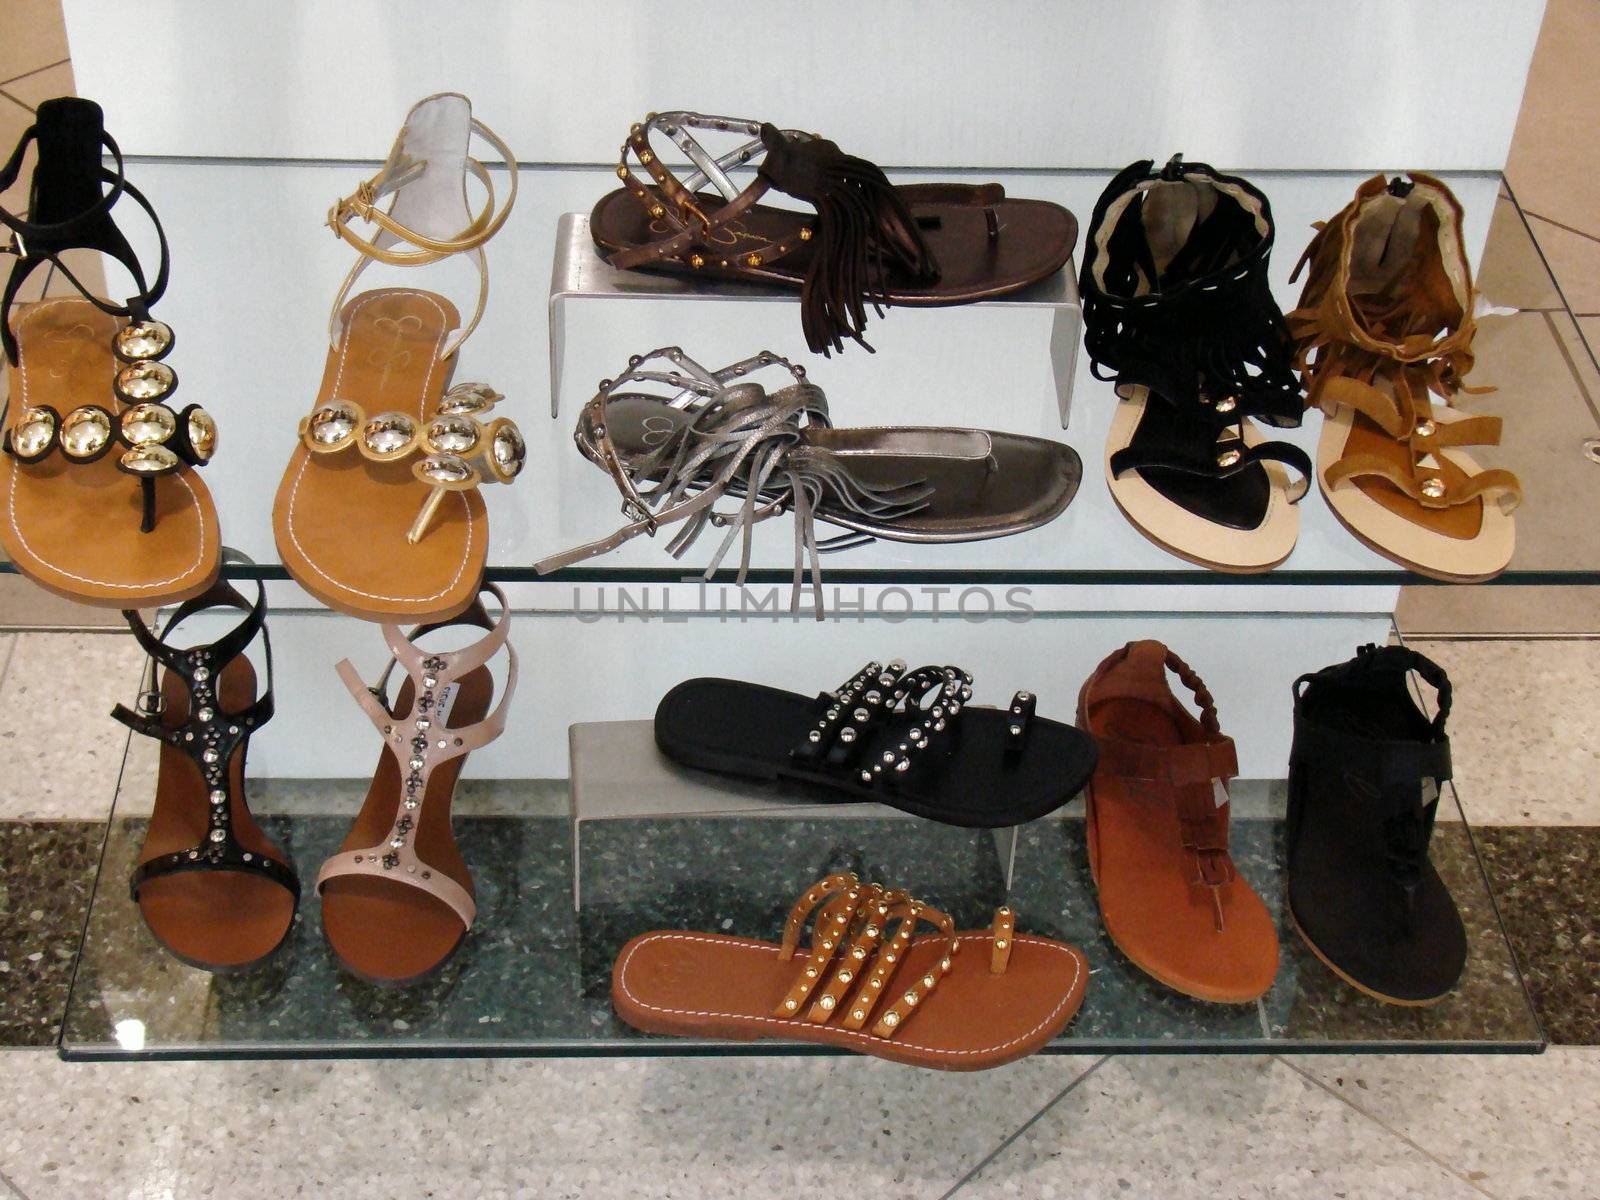 Summer Shoe Display by hicster